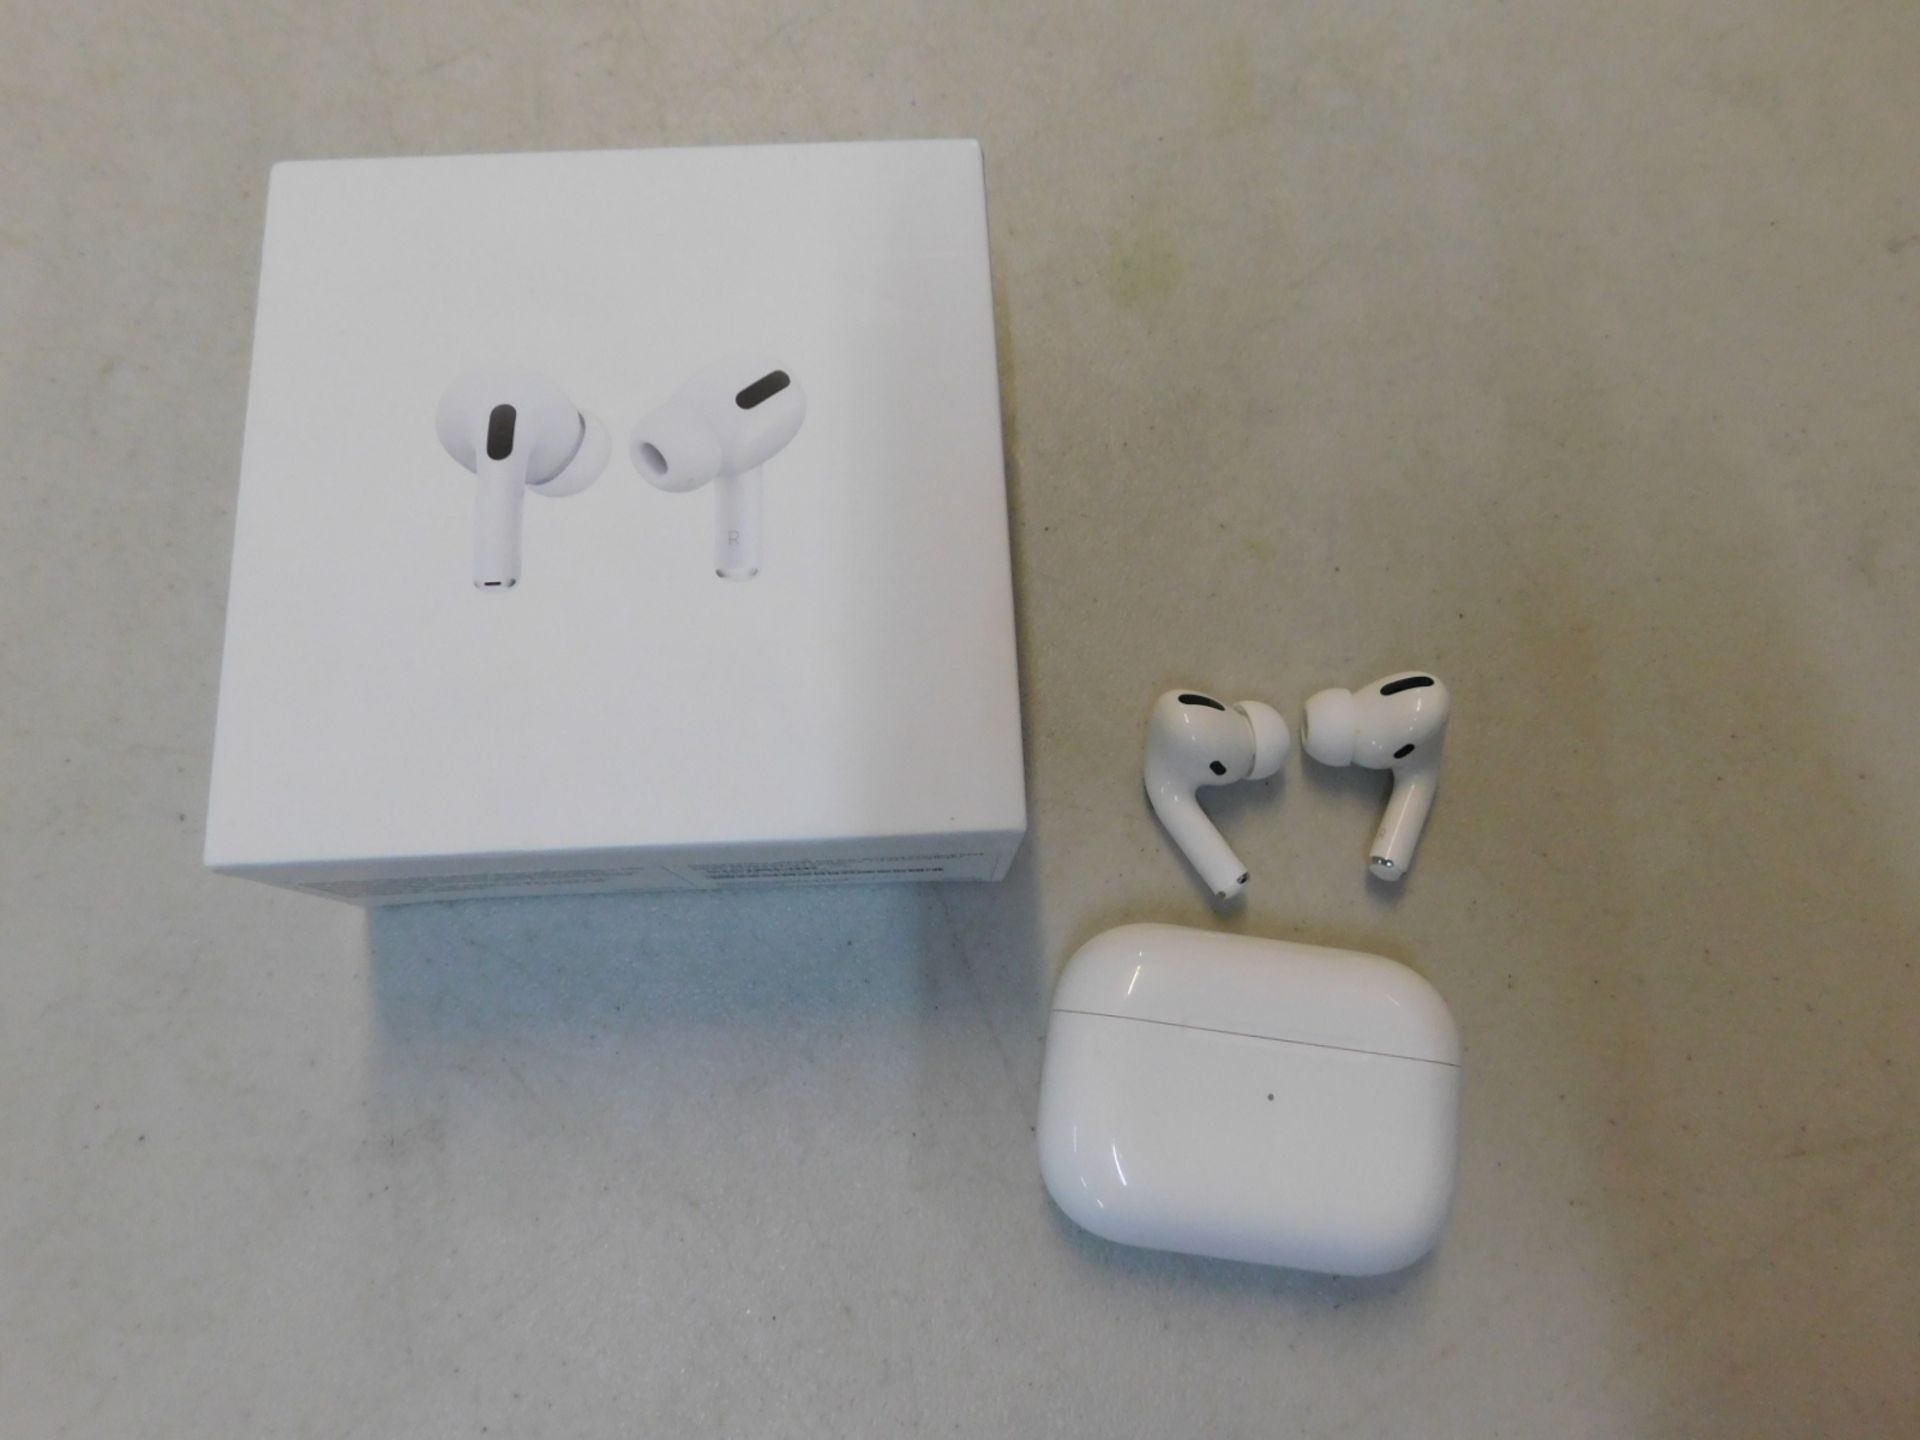 1 BOXED PAIR OF APPLE AIRPODS PRO BLUETOOTH EARPHONES WITH WIRELESS CHARGING CASE RRP Â£249.99 (